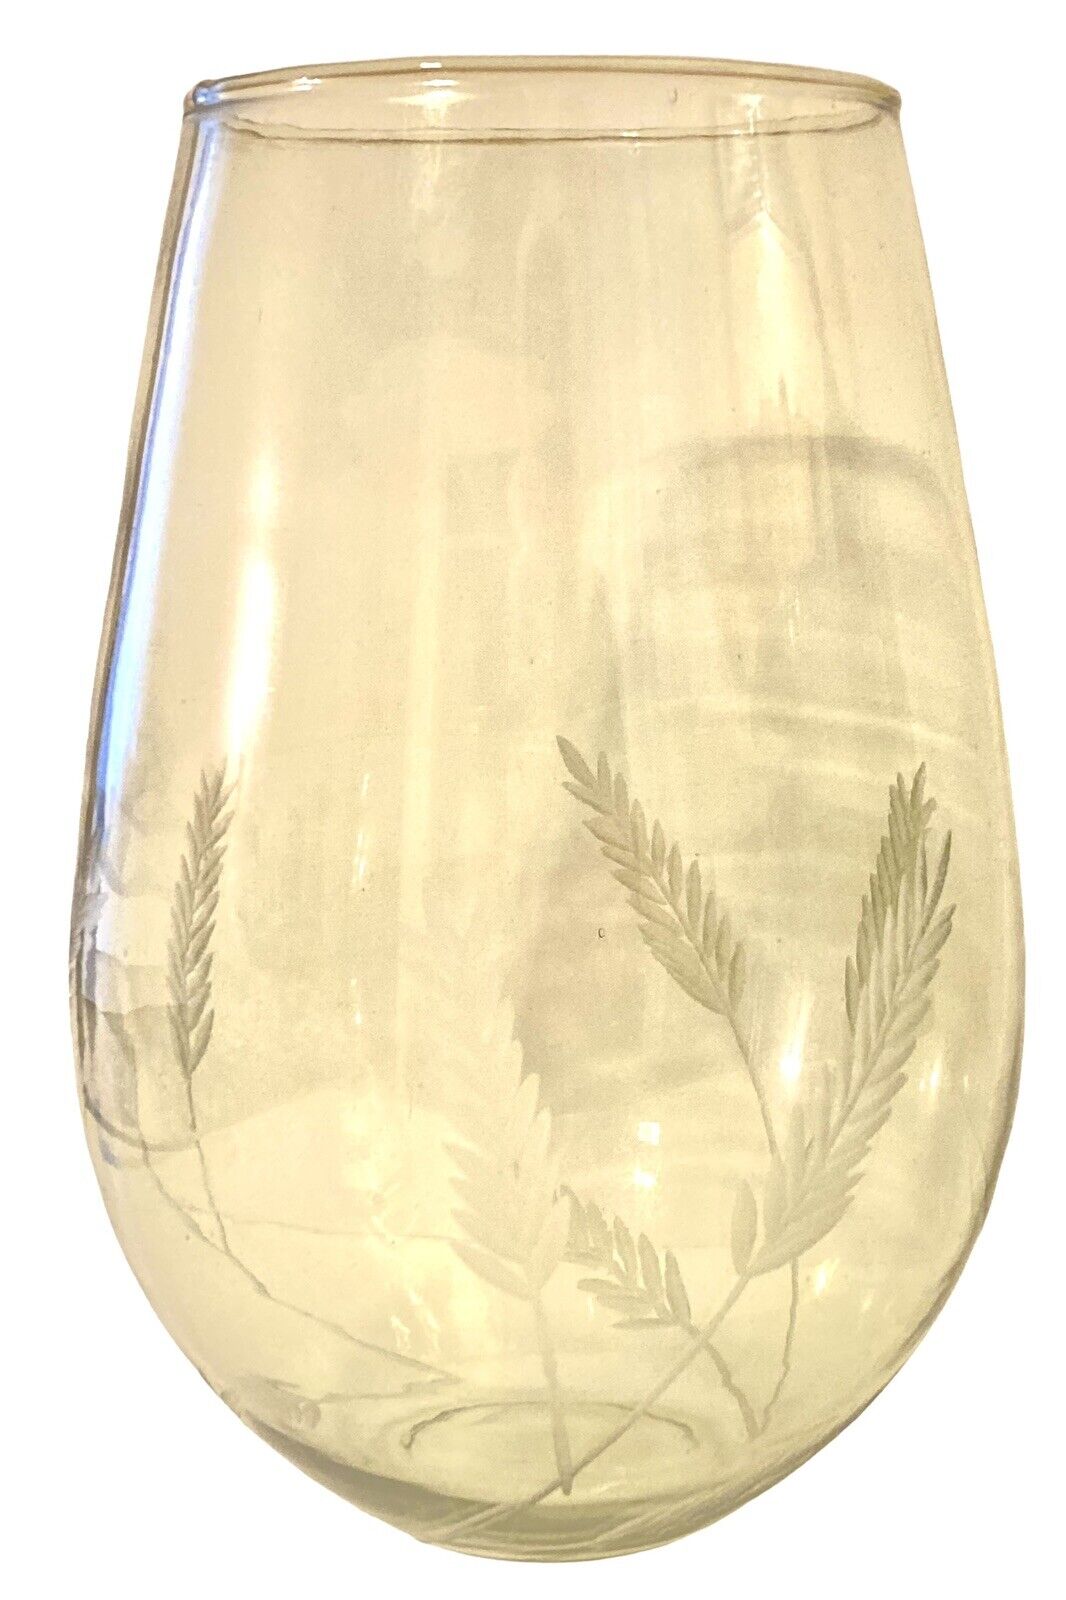 Vintage Etched Smoked Glass Vase Etched Wheat Pattern Large Vase